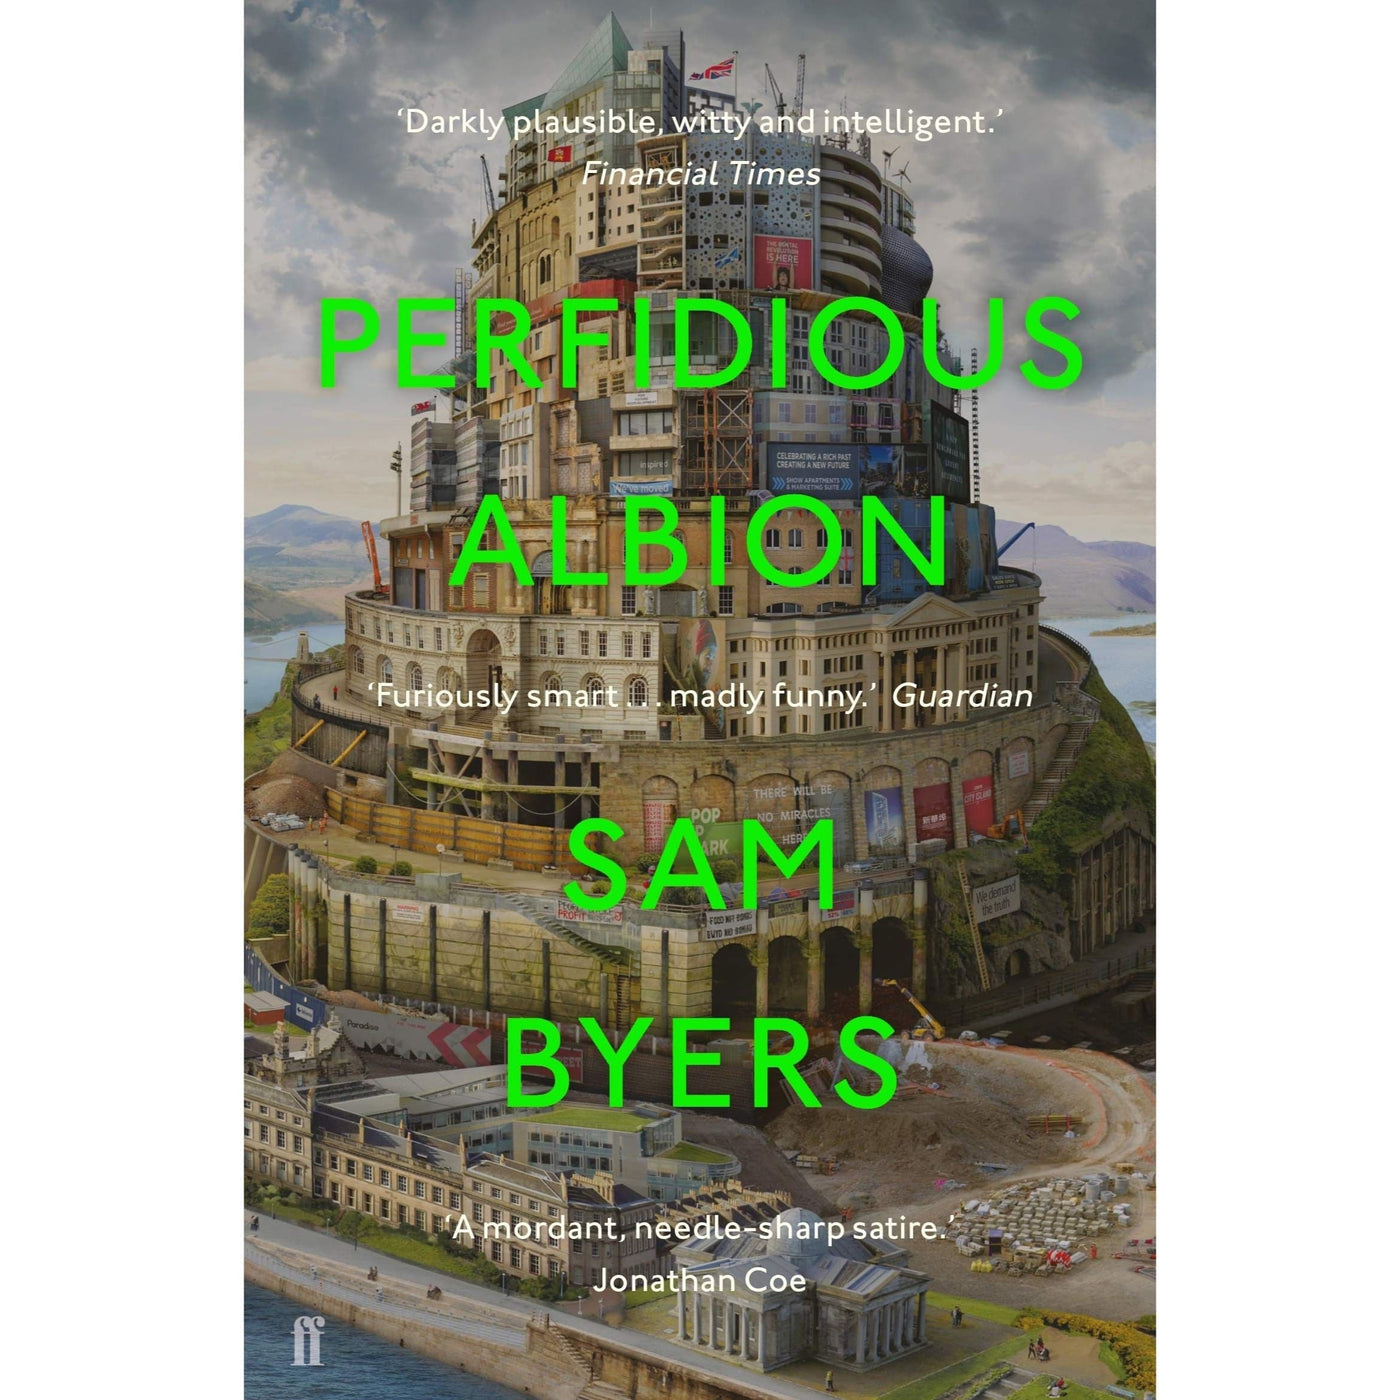 Sam Byers: Perfidious Albion